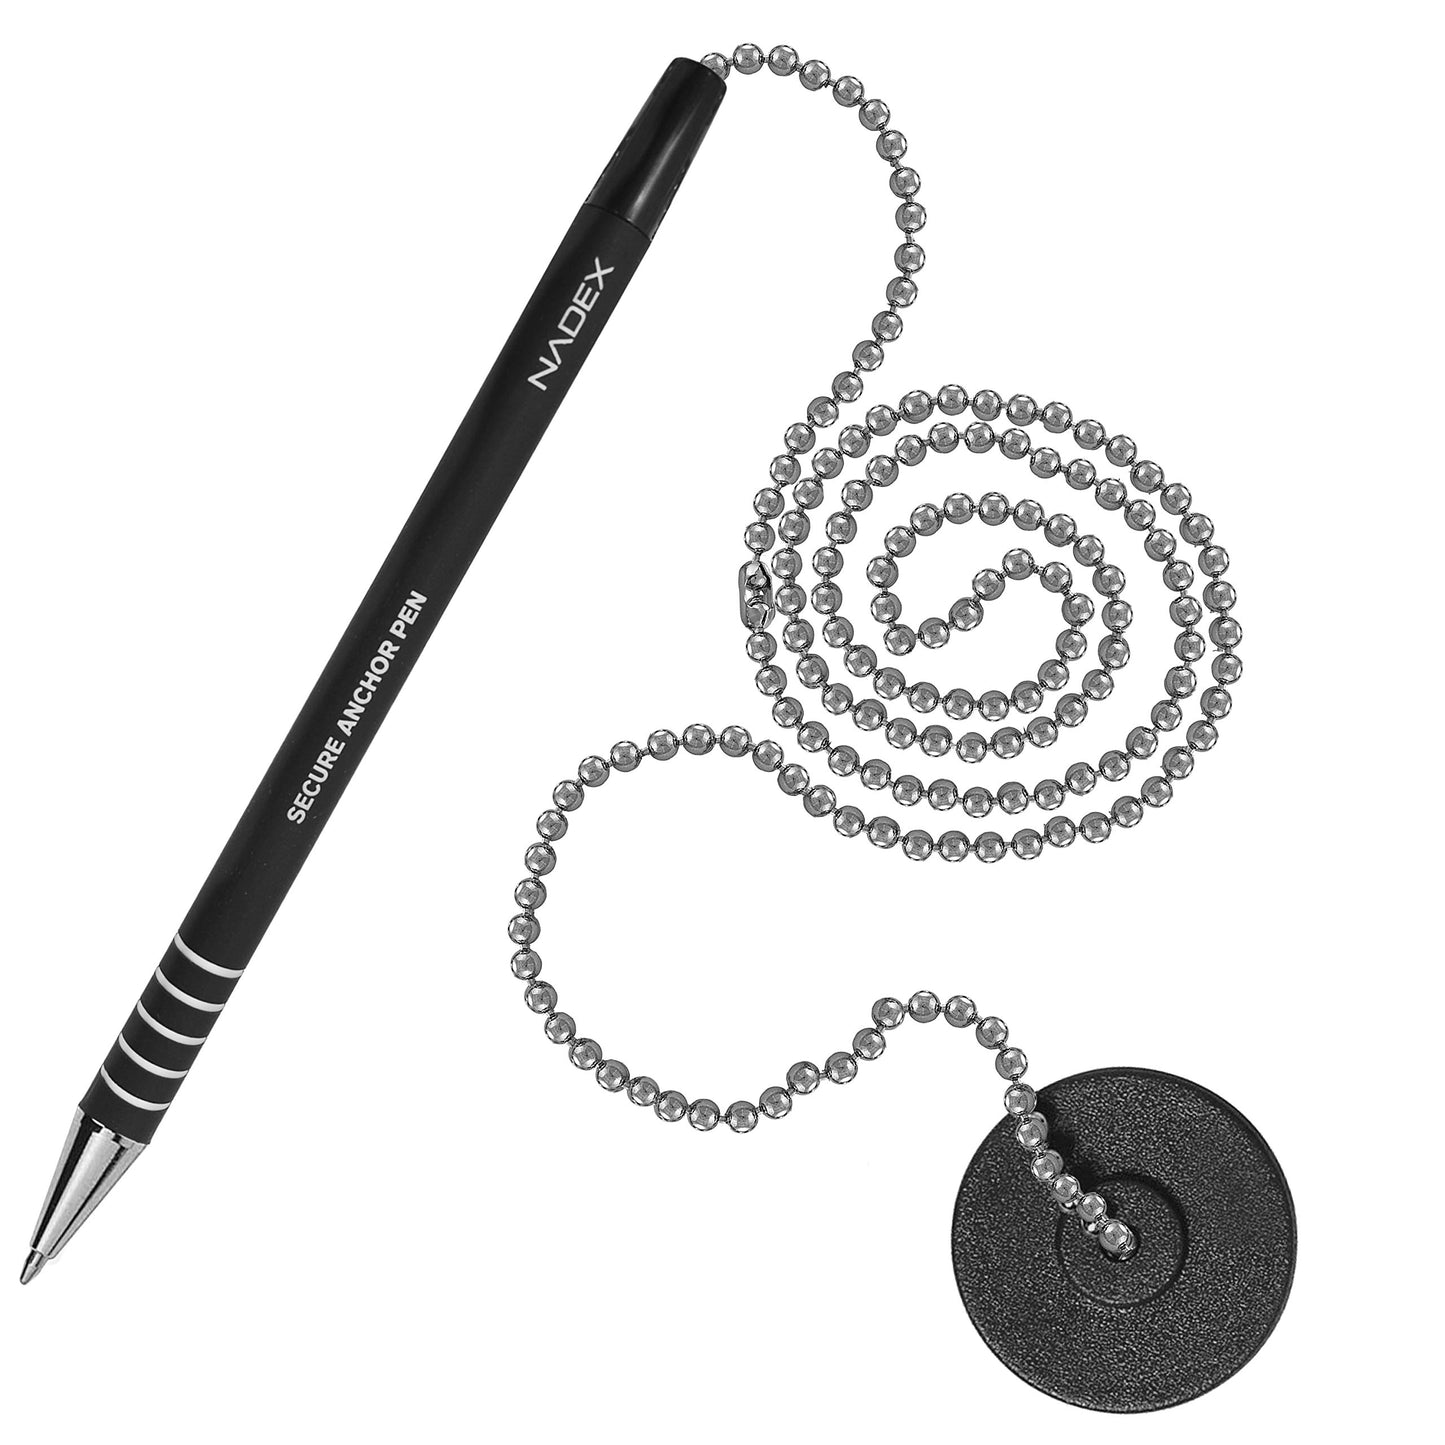 Nadex Chain Security Pen Set | 1 Pen, 1 Adhesive Mount, and 5 Refills (Black)